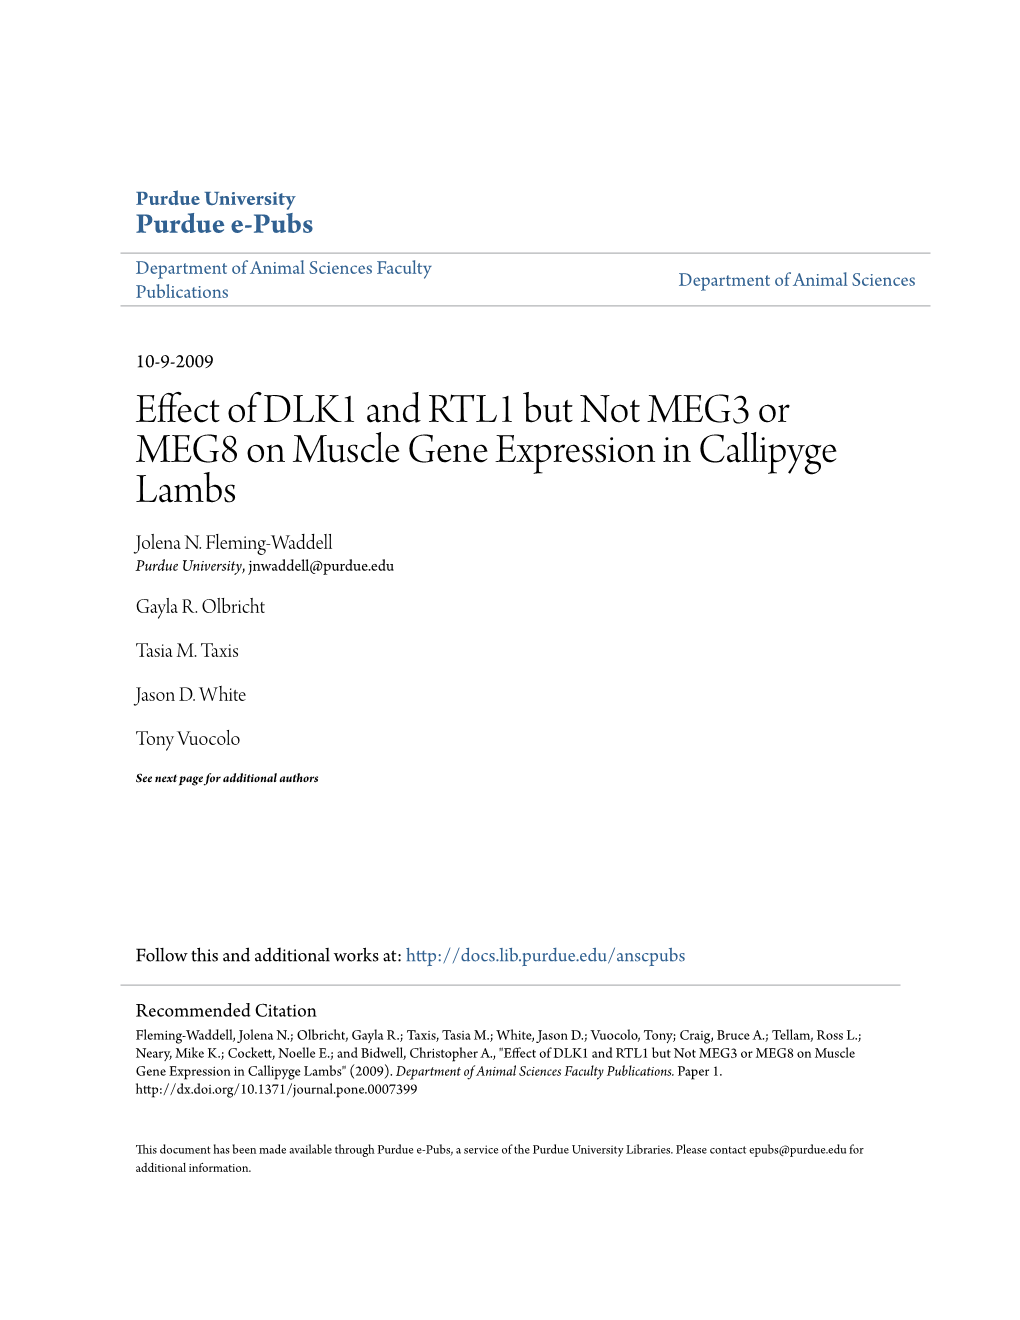 Effect of DLK1 and RTL1 but Not MEG3 Or MEG8 on Muscle Gene Expression in Callipyge Lambs Jolena N